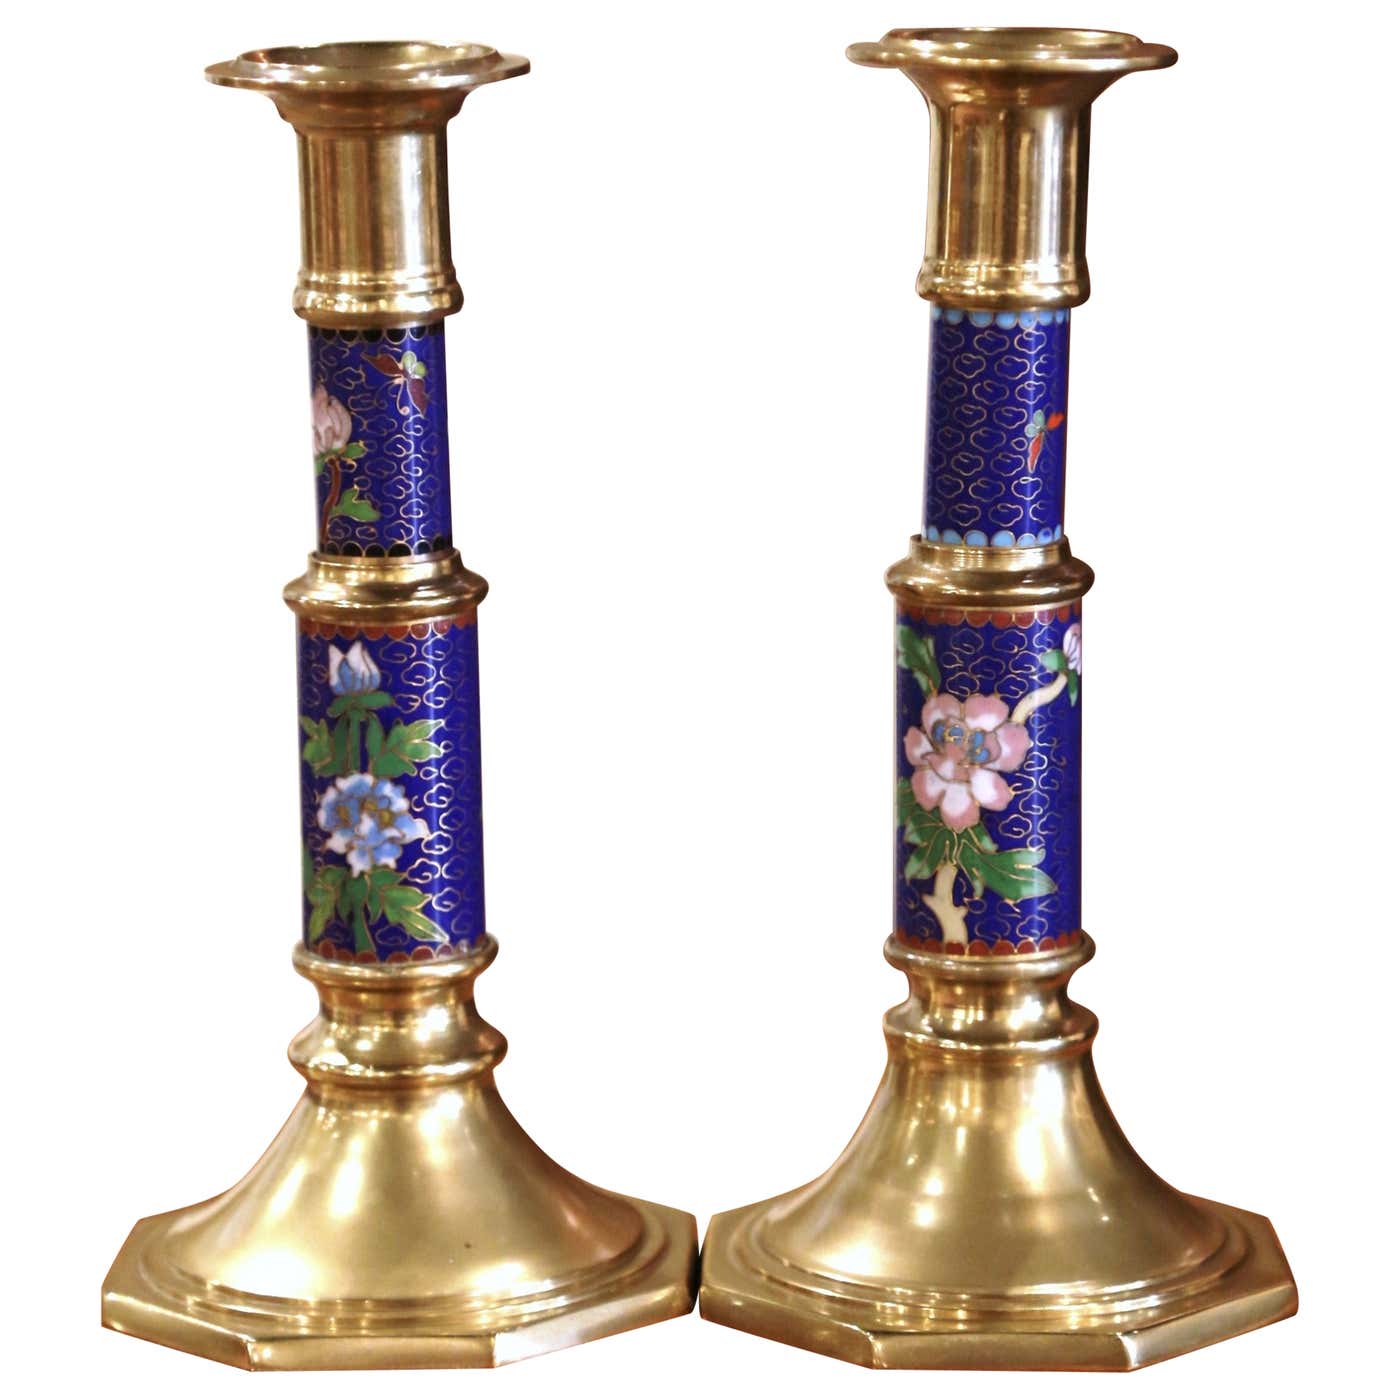 Pair of Vintage Brass Champleve Candle Holders with Floral & Leaf Motifs -  Country French Interiors